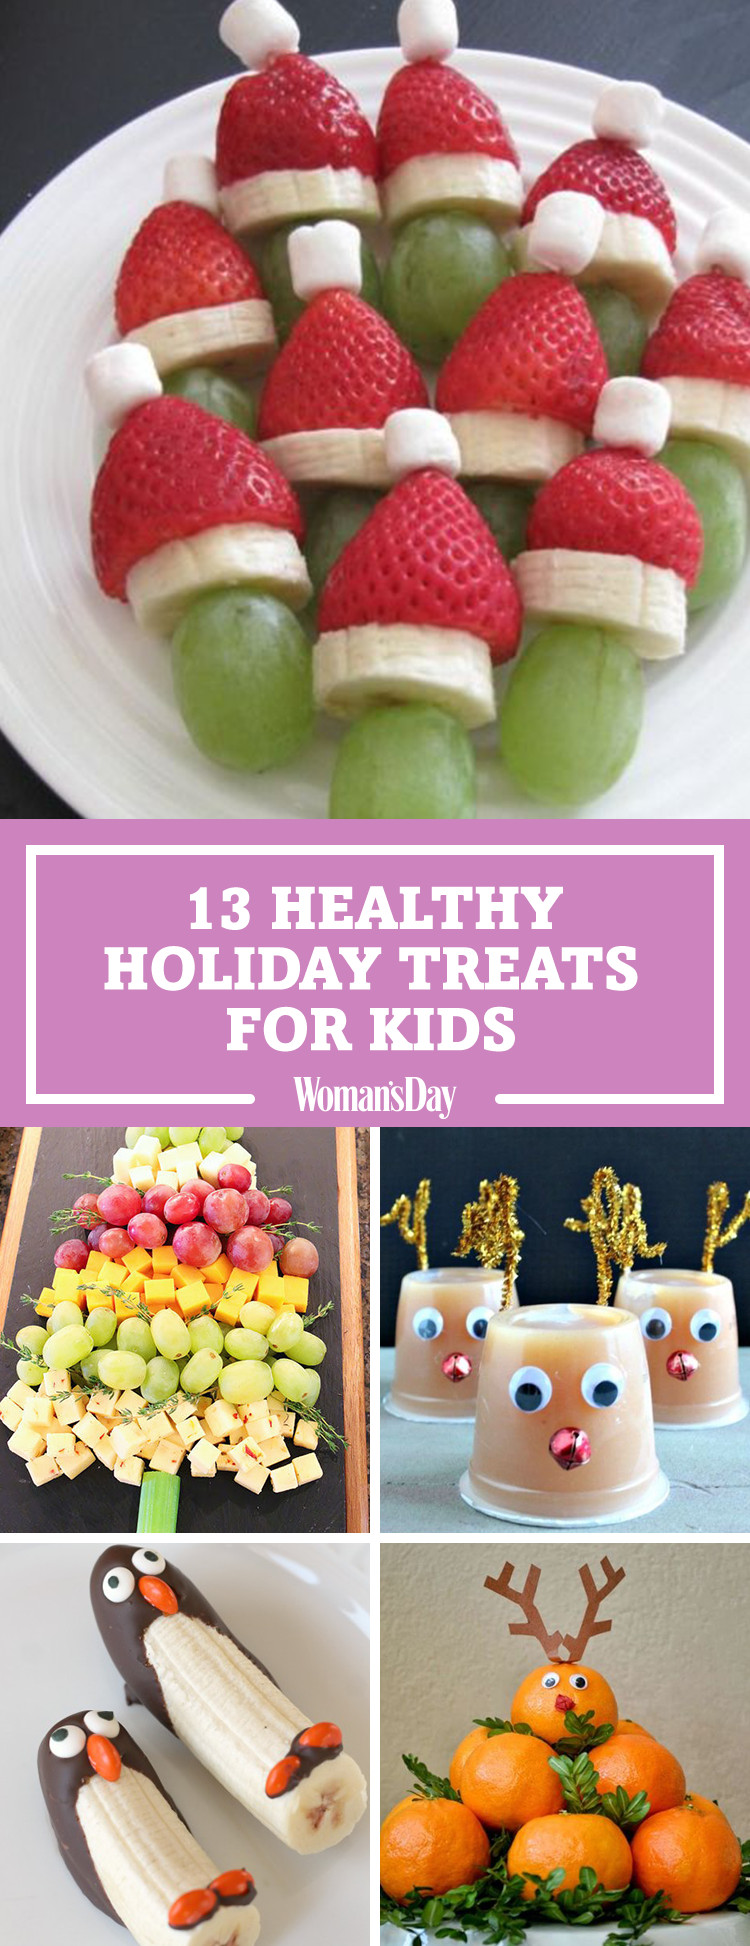 Quick Healthy Snacks For Kids
 17 Healthy Christmas Snacks for Kids Easy Ideas for